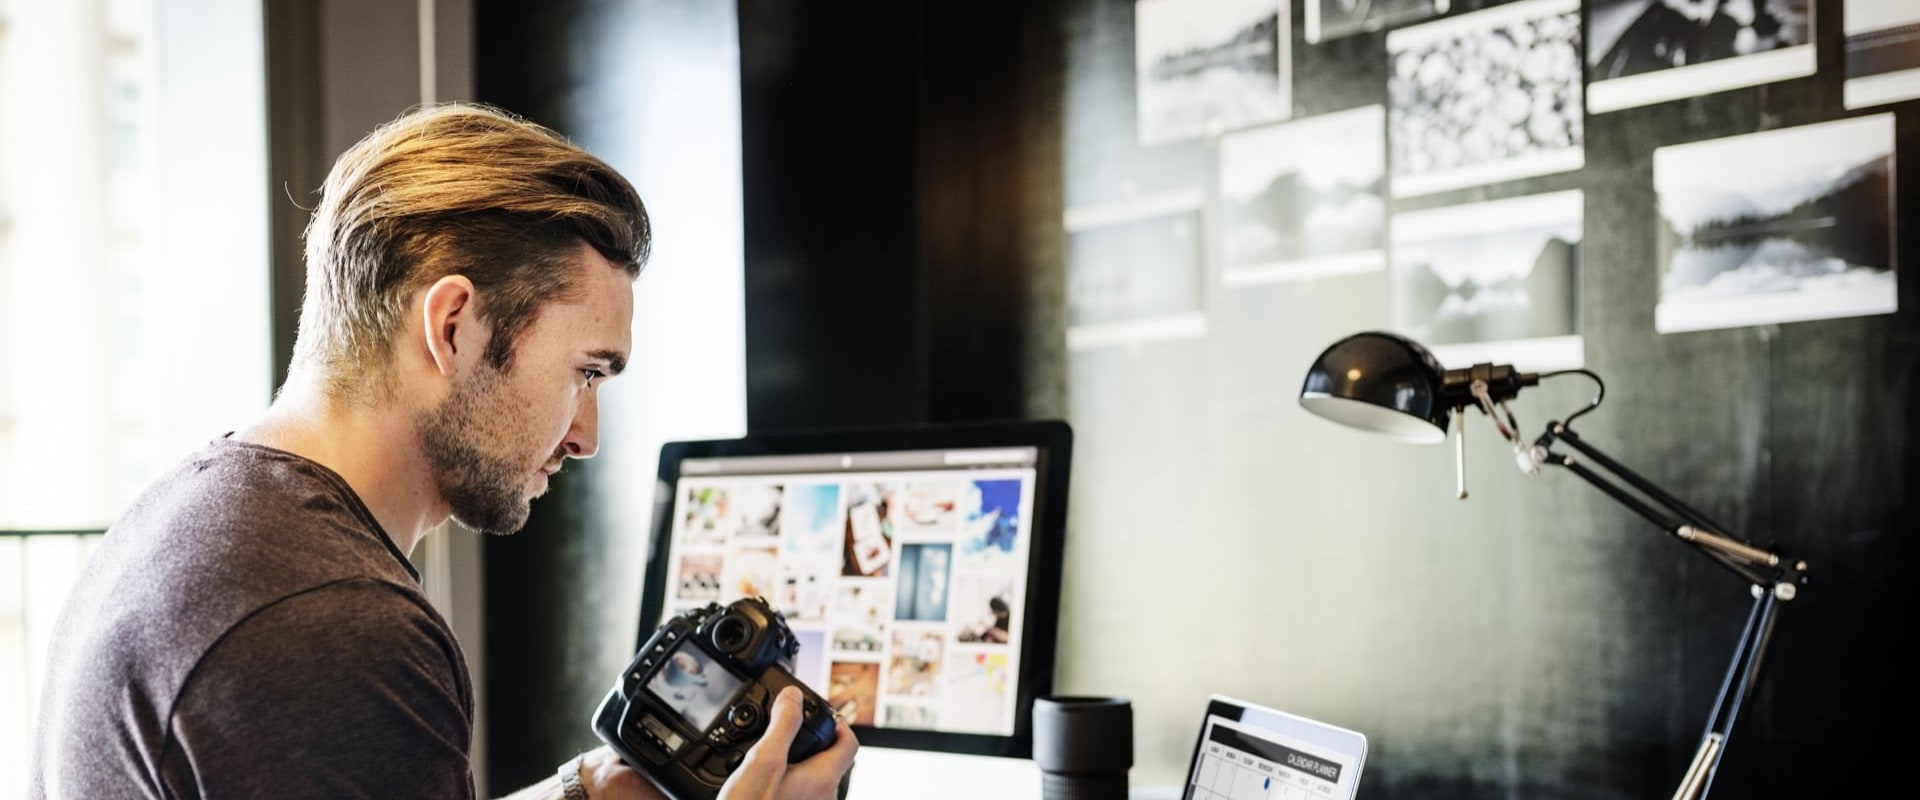 Developing Your Website for Your Photography Business